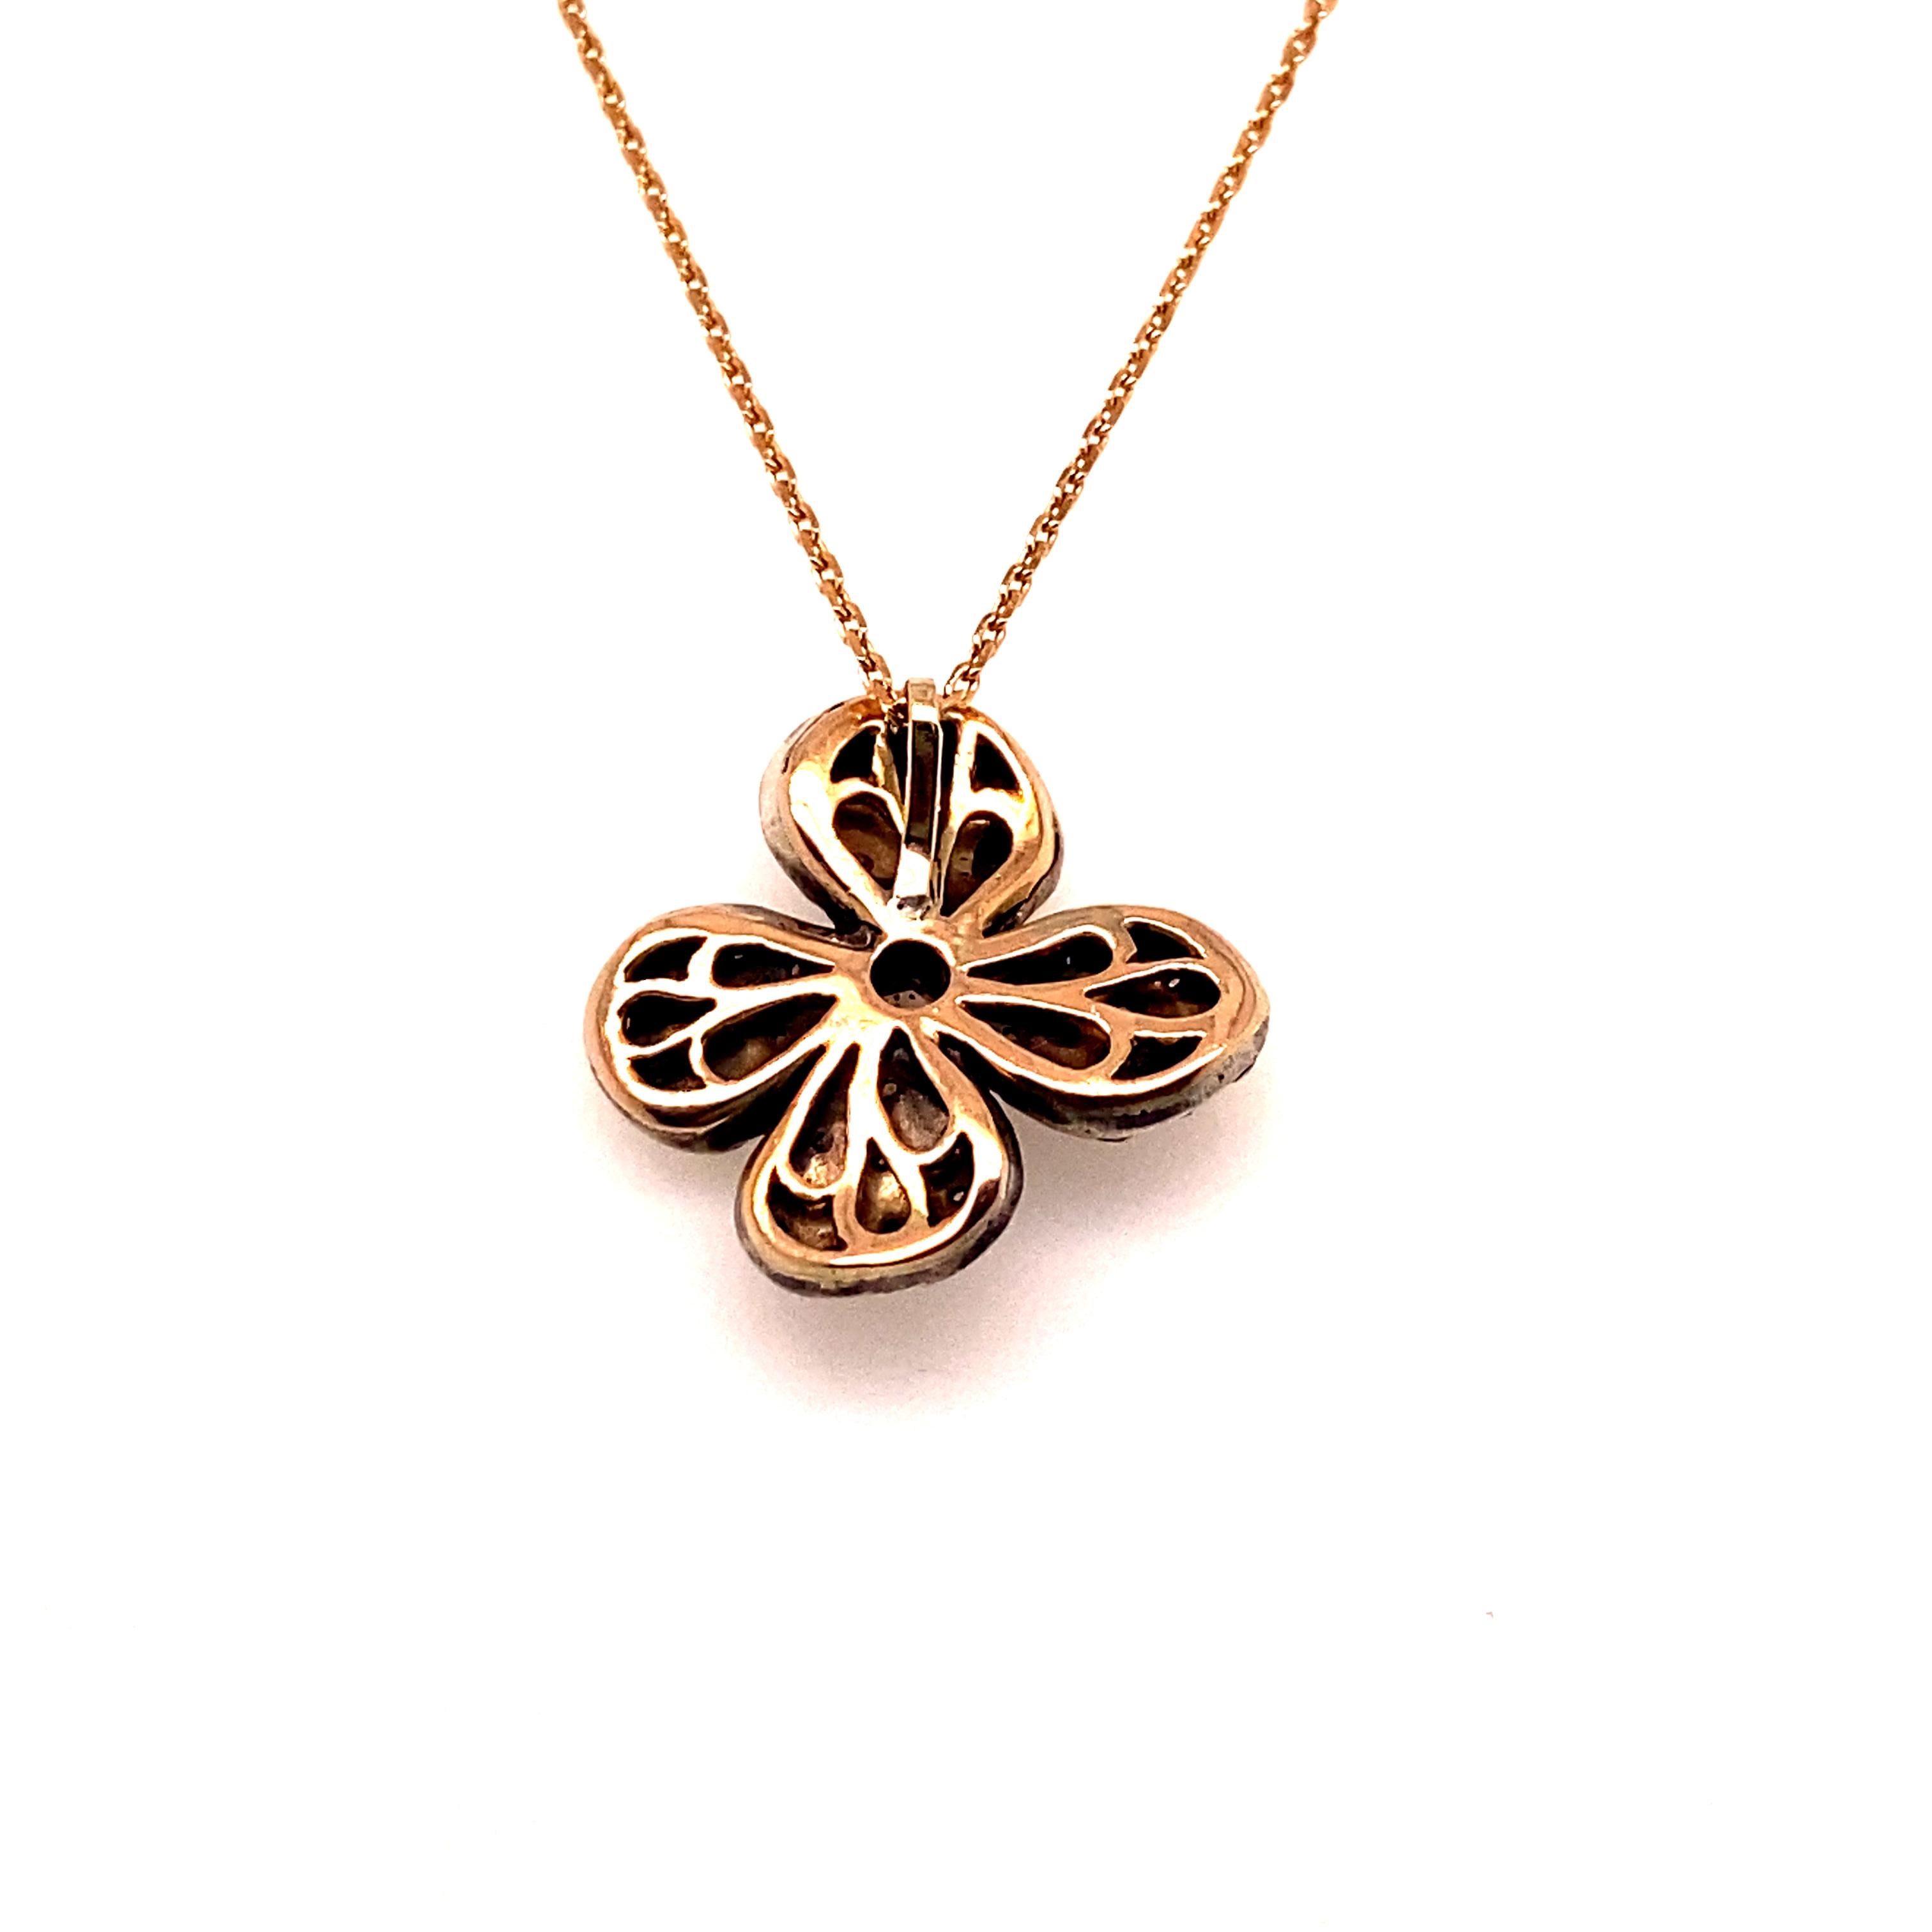 This flower pendant and chain, masterfully created by hand from 9-karat rose gold and 925 silver is set with a handful of carefully selected rose-cut white diamonds. 

The flower pendant is 2 centimetres in depth and length, and it weighs 5.65